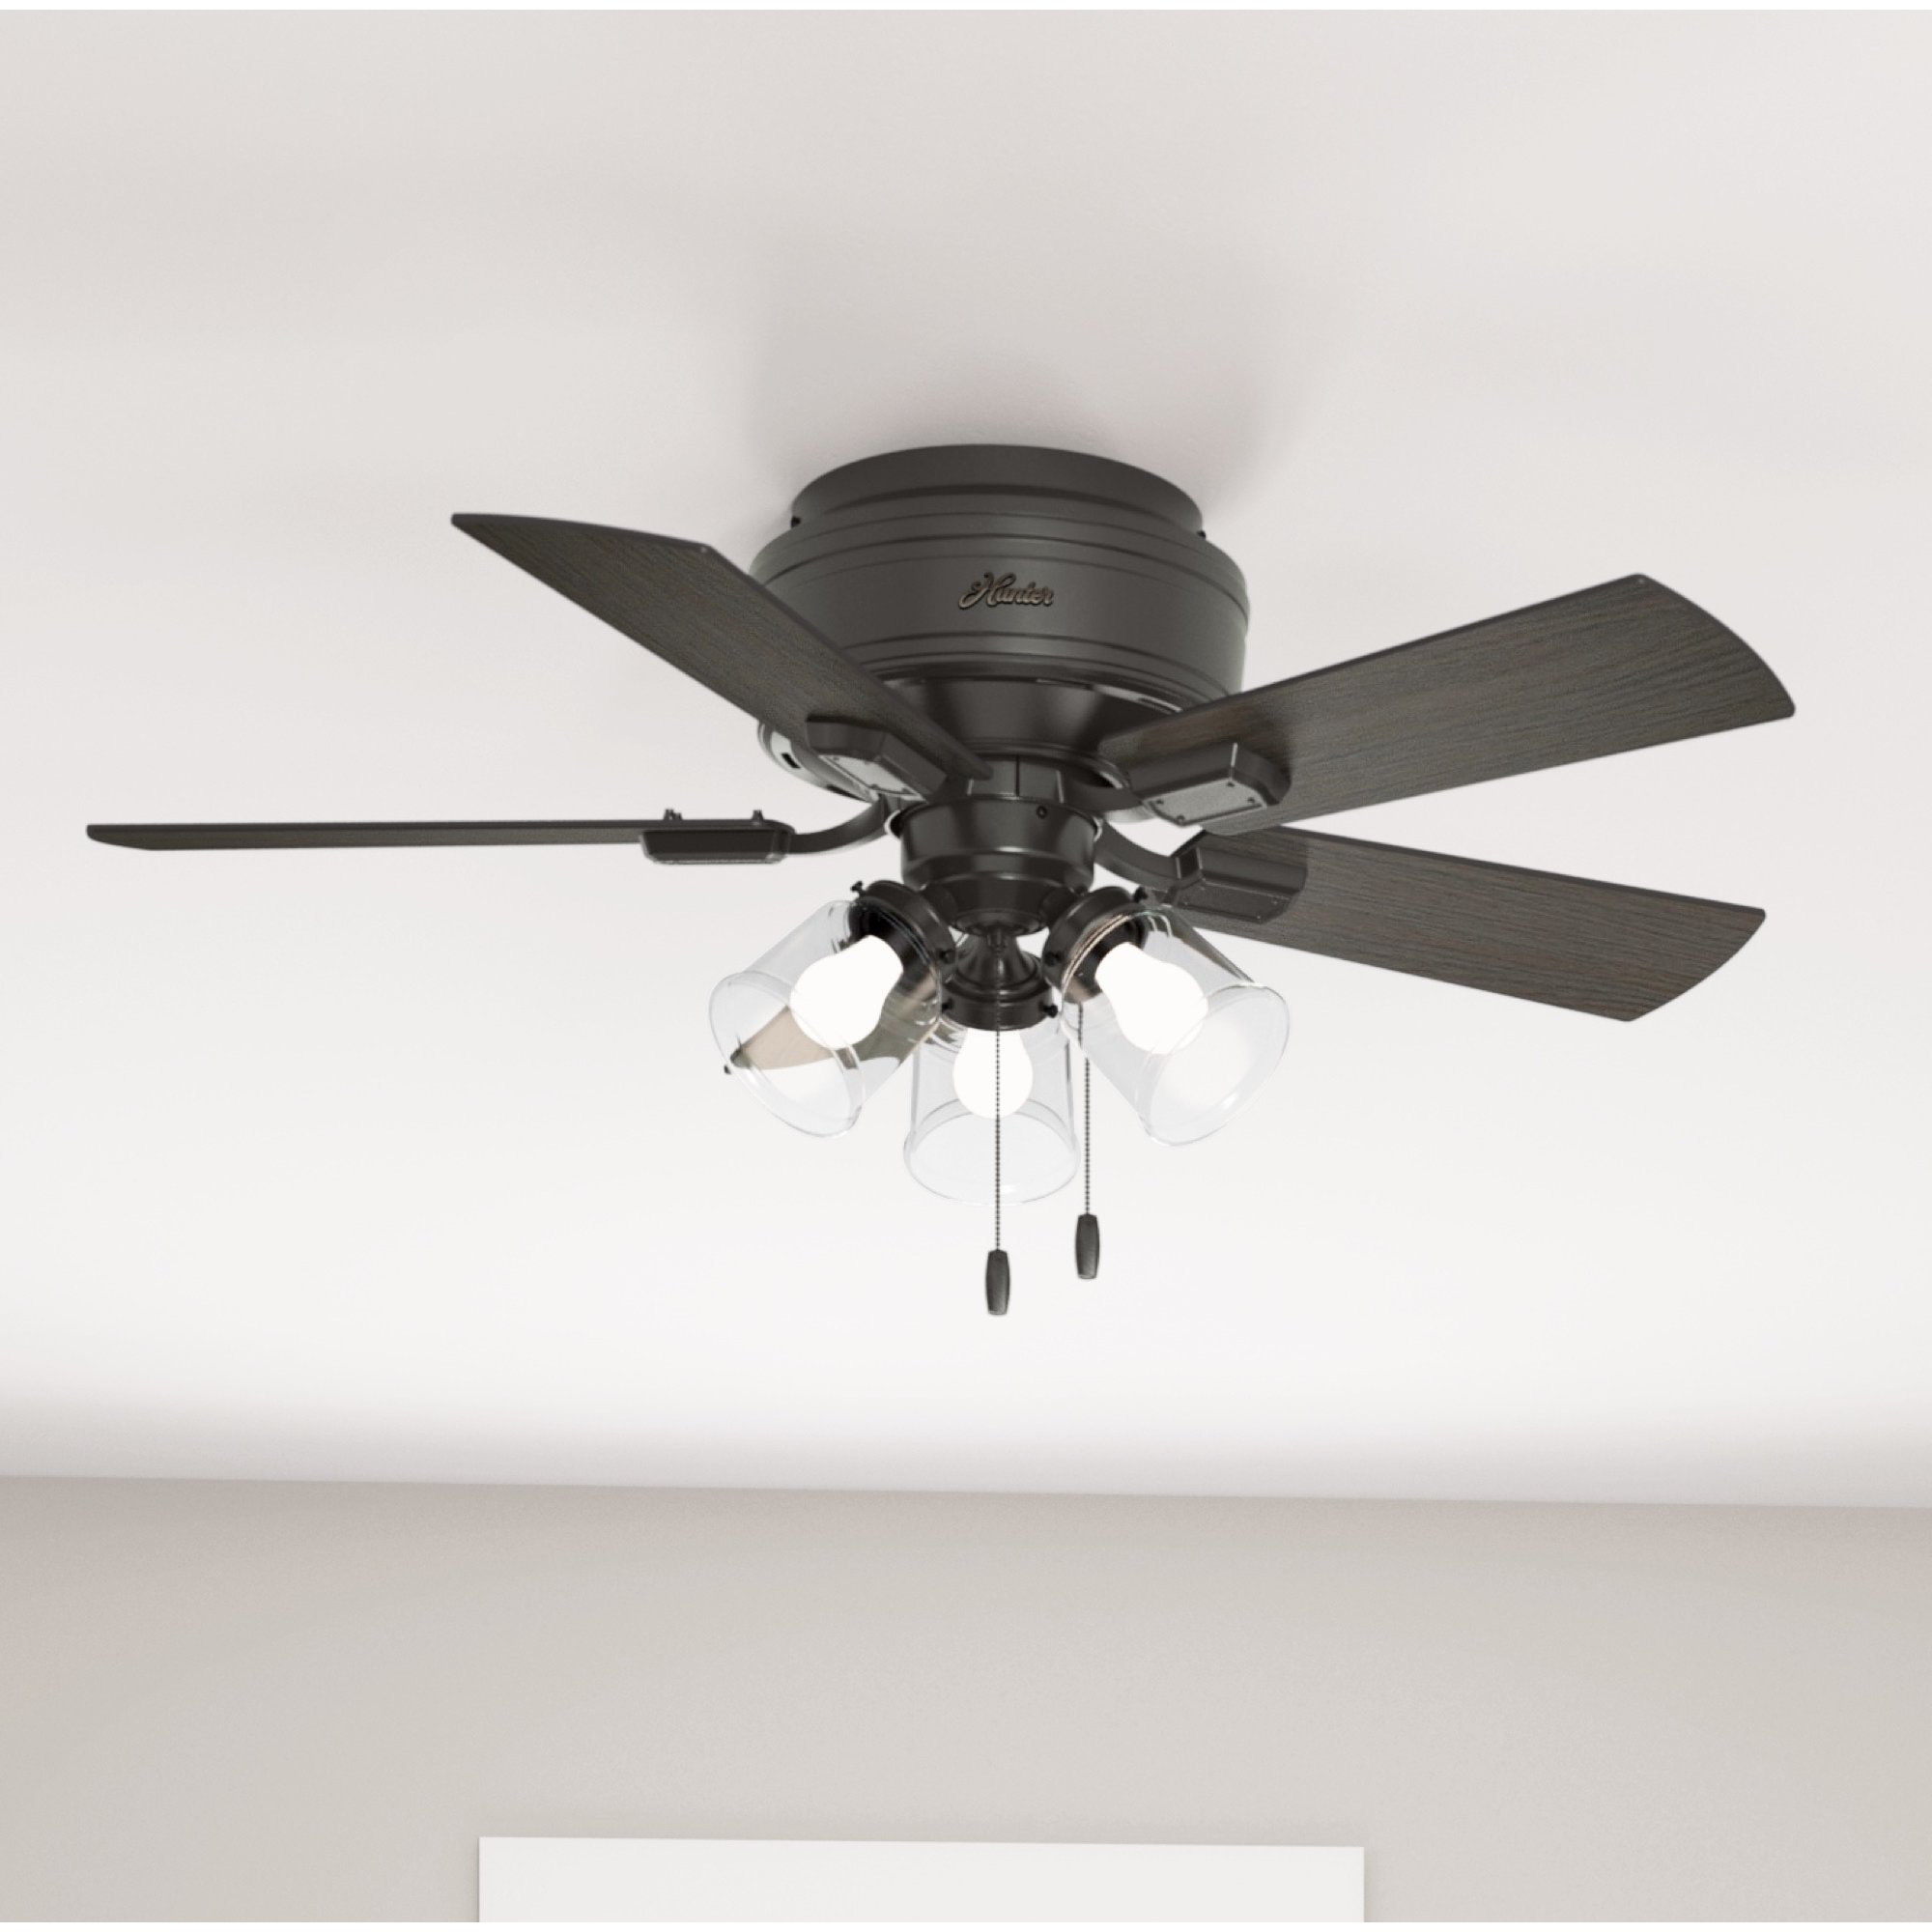 Hunter Fan 42 Crestfield 5 Blade Standard Ceiling Fan With Pull Chain And Light Kit Included Reviews Wayfair